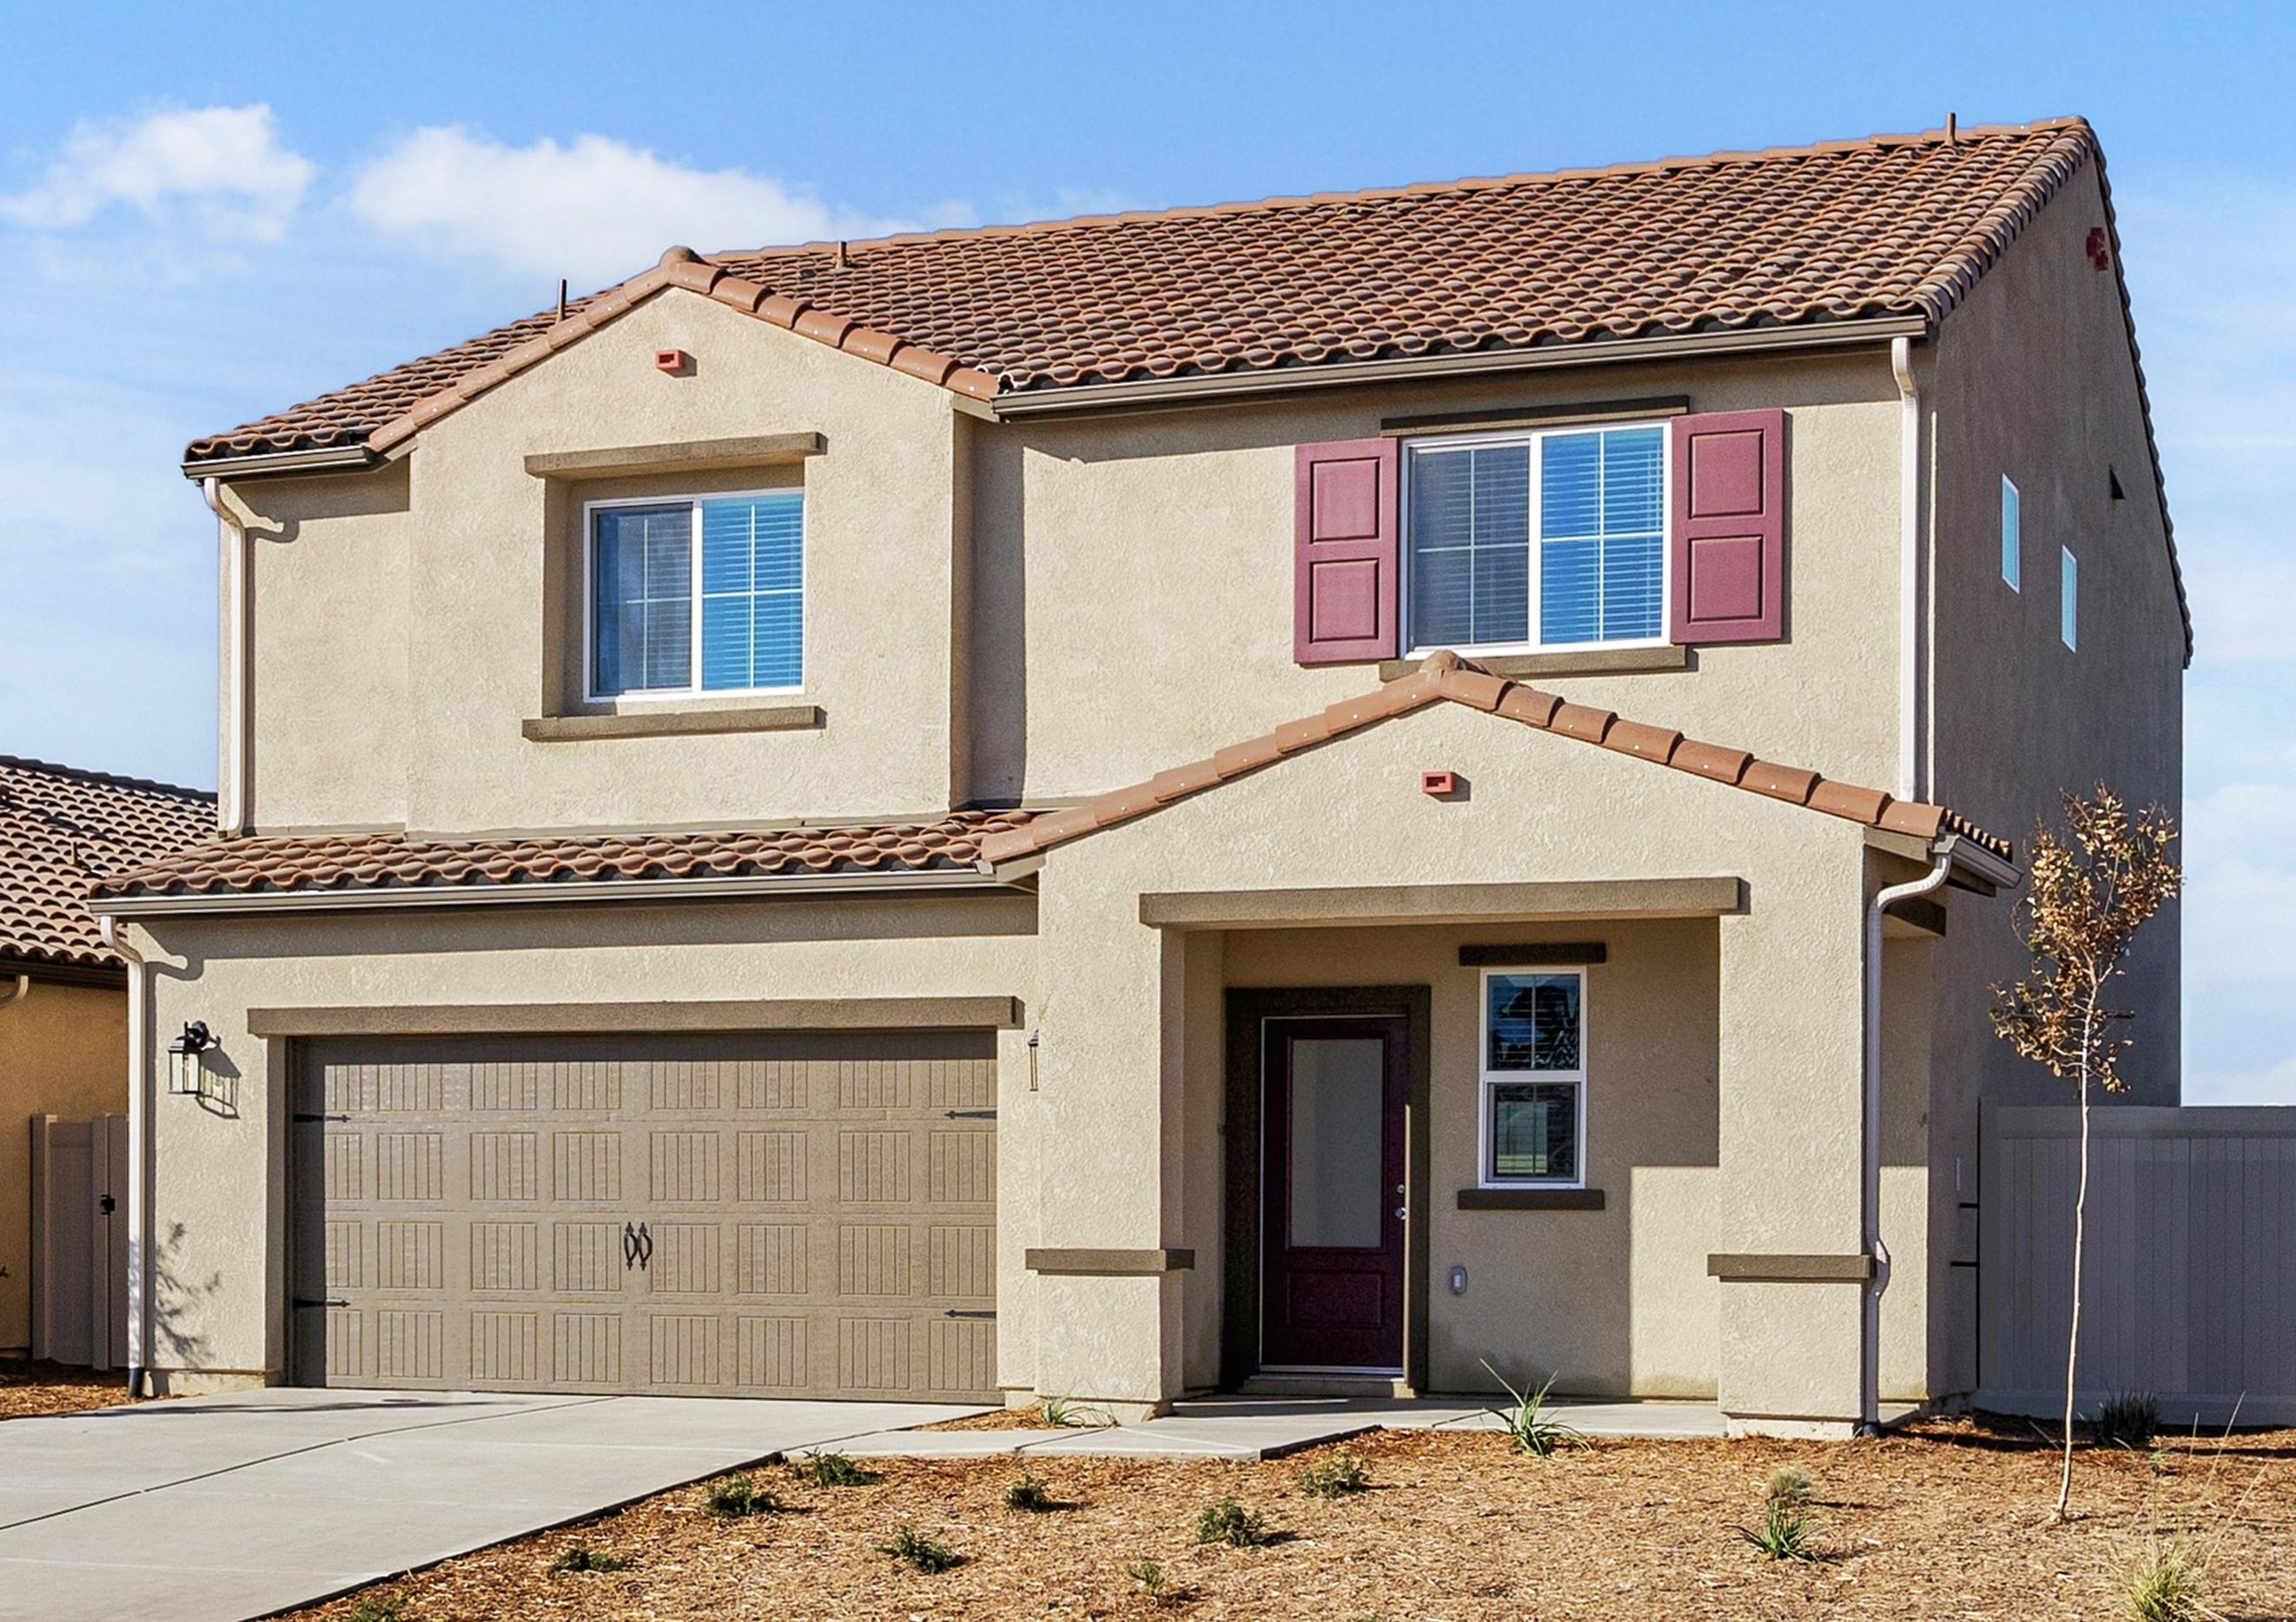 The Redondo is a beautiful two story home with stucco.